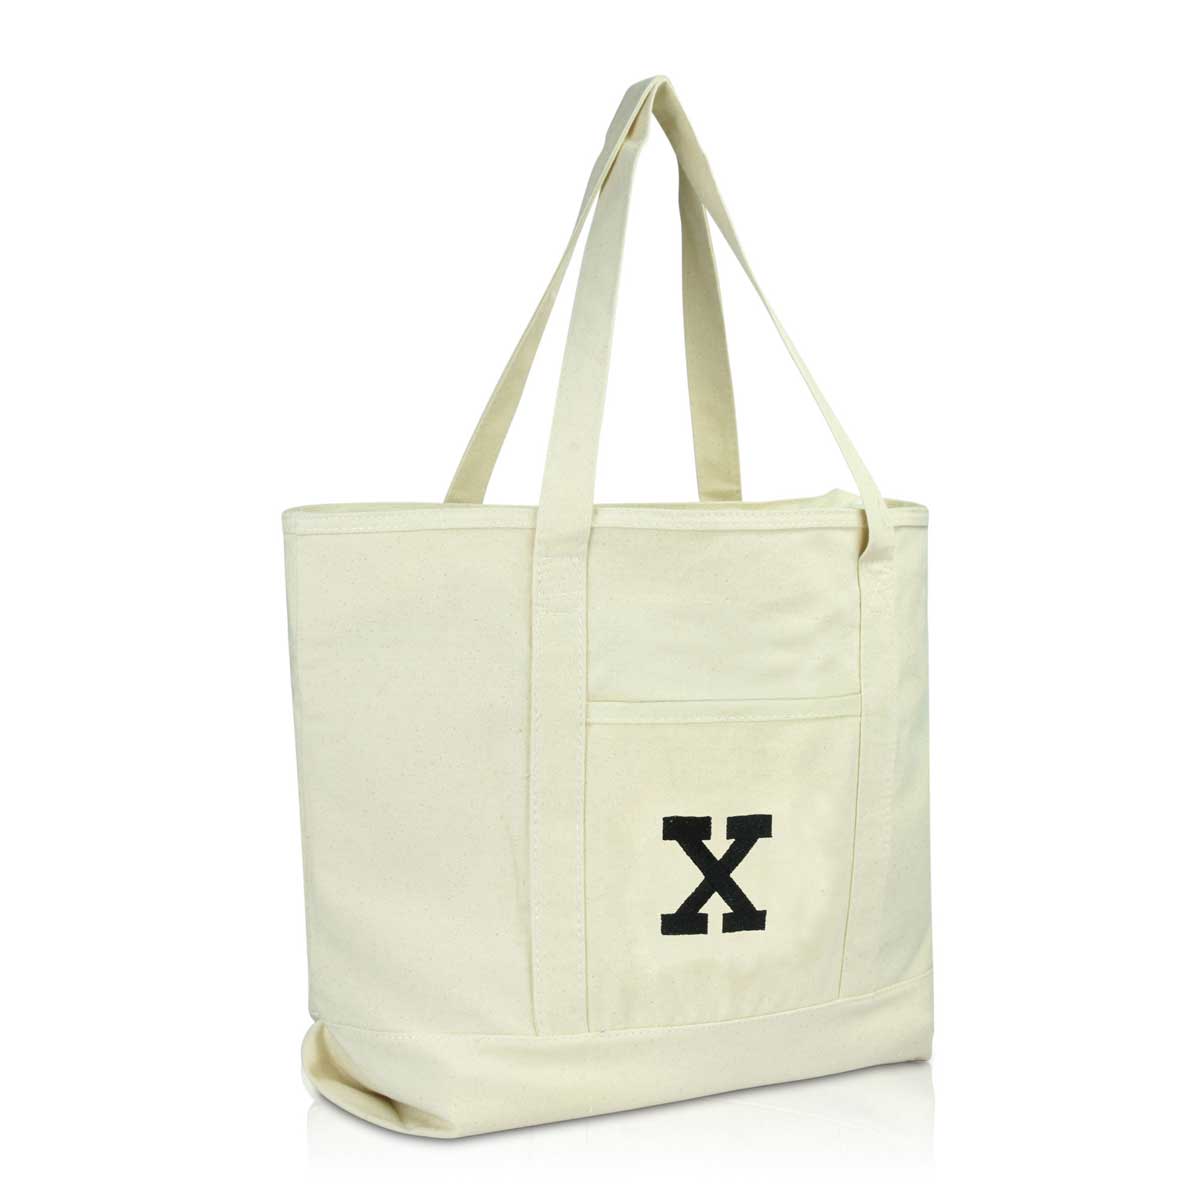 Dalix Initial Tote Bag Personalized Monogram Zippered Top Letter - X